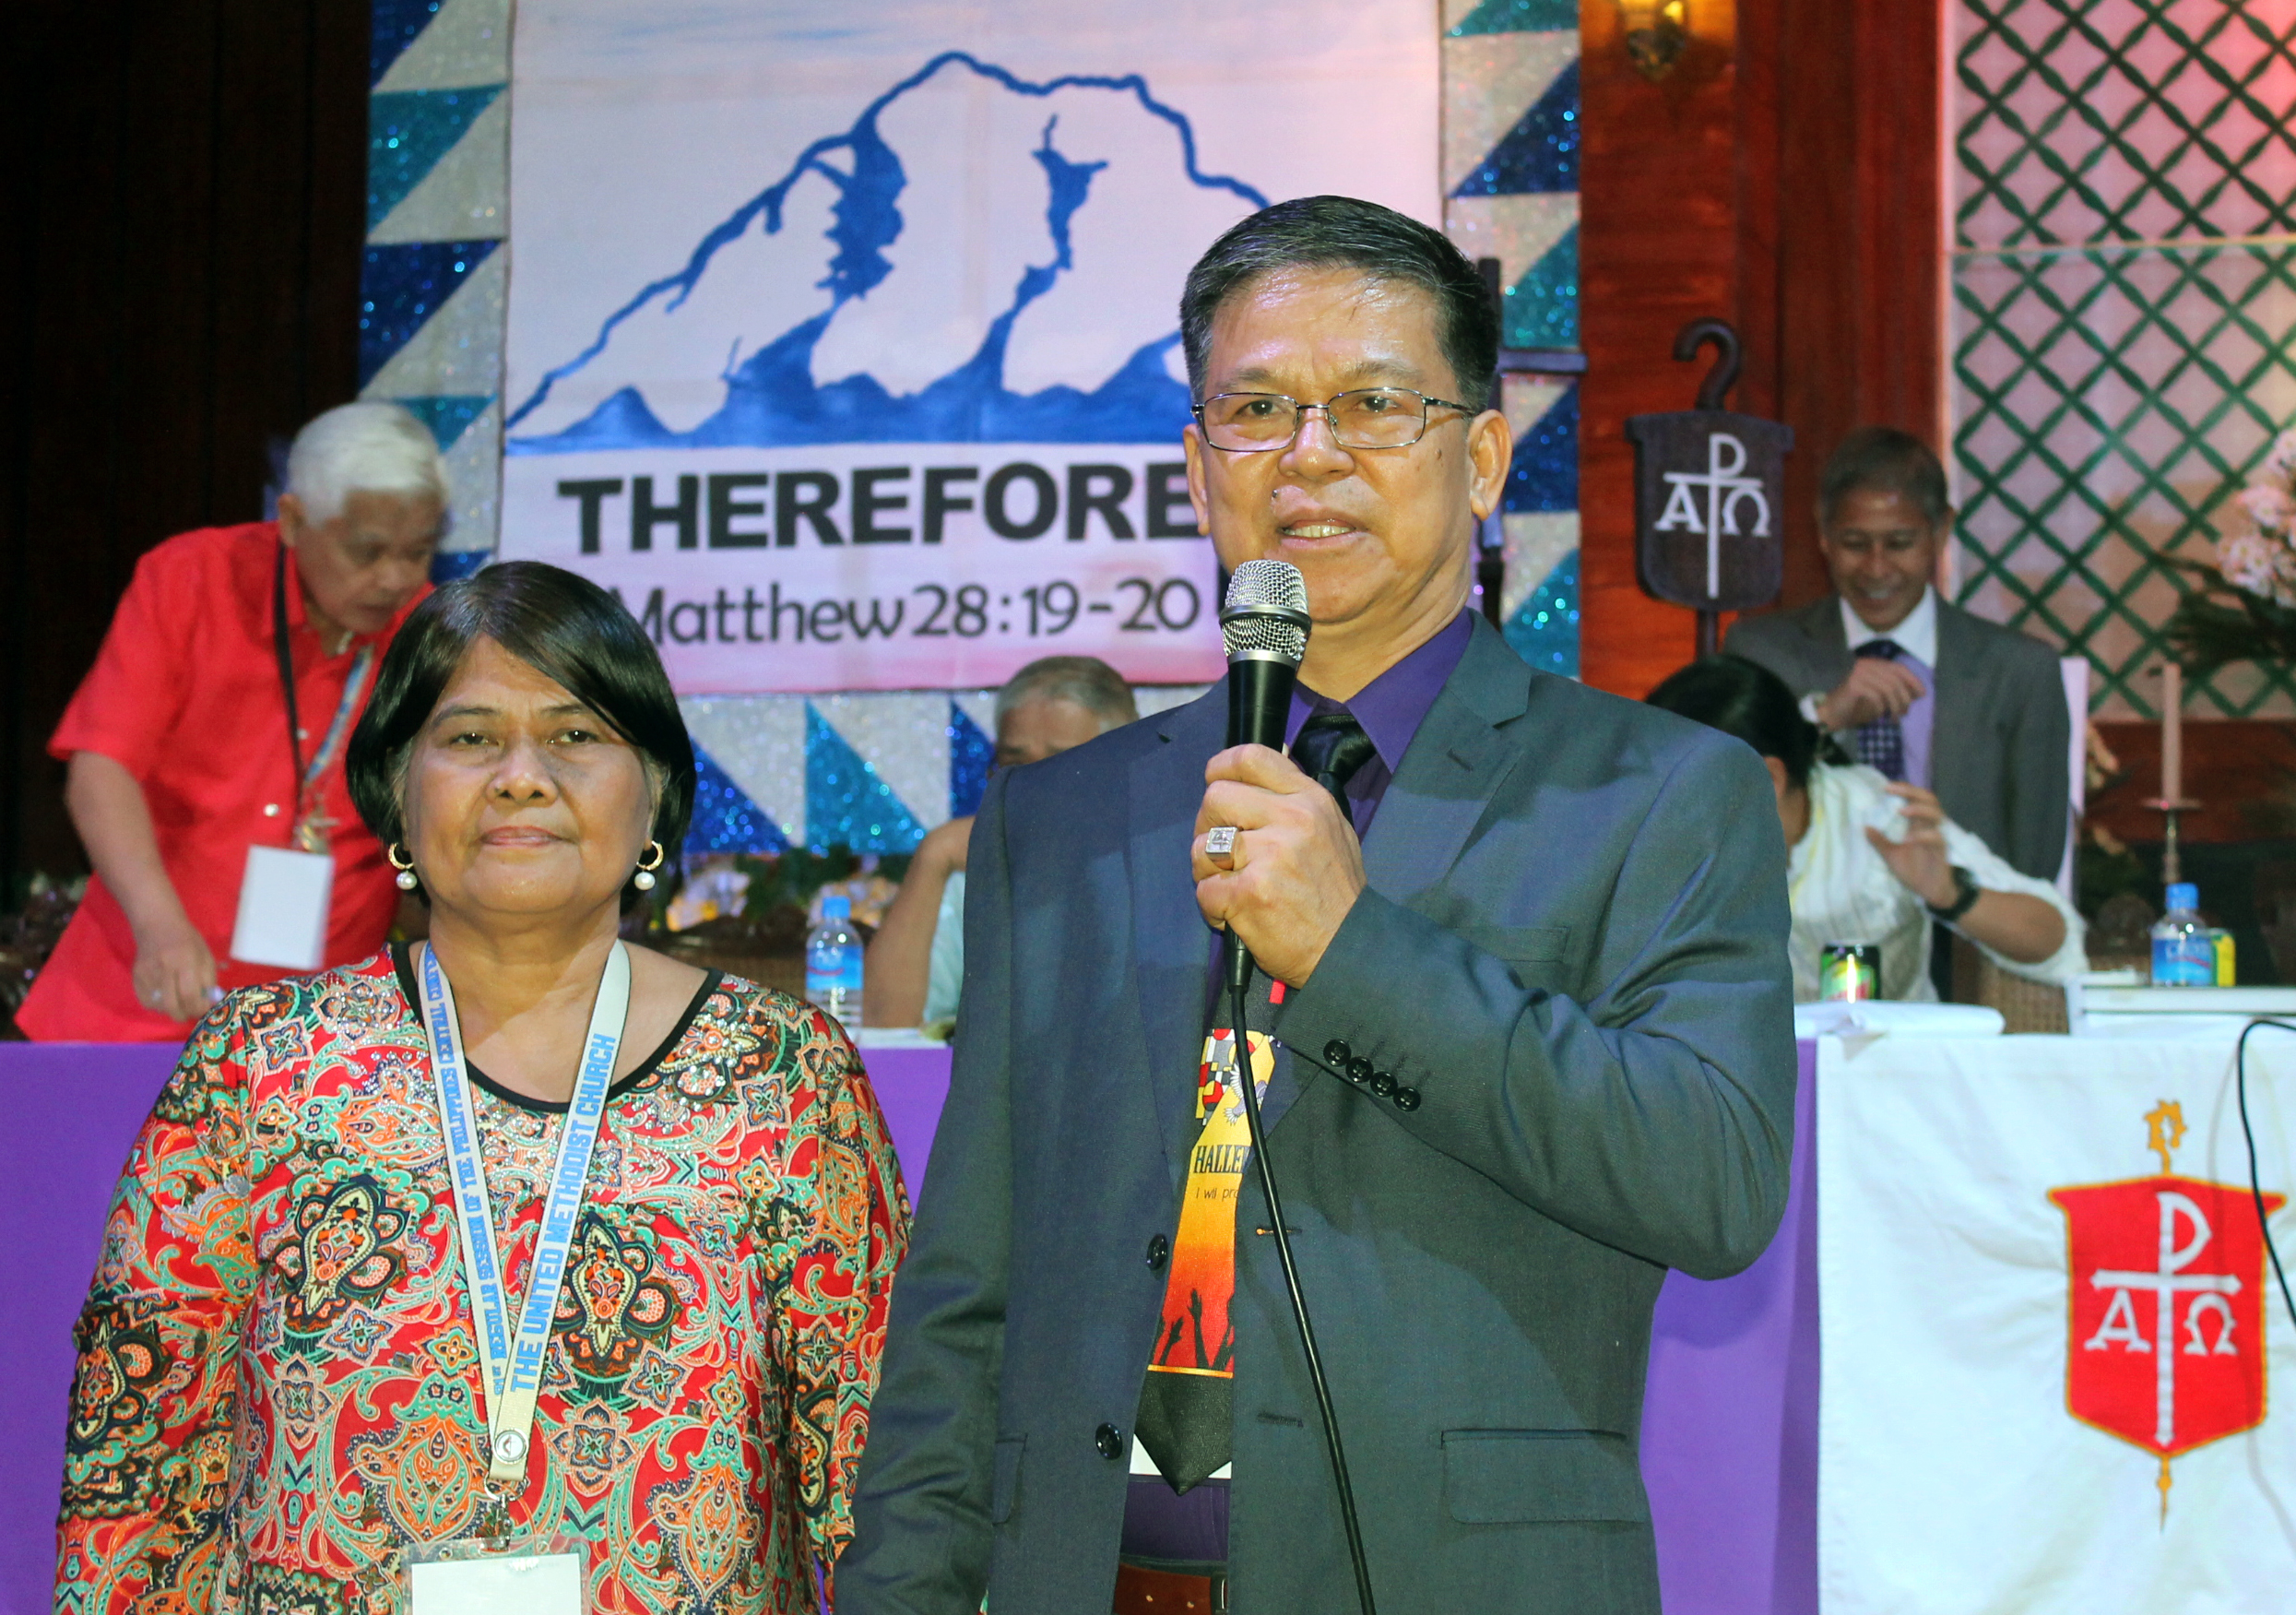 Bishop Ciriaco Q. Francisco, accompanied by his wife, Restetita Victoria, spoke Dec. 2 to delegates at the Philippines Central Conference after his re-election as a bishop in The United Methodist Church.  Photo by Gladys Mangiduyos, UMNS.